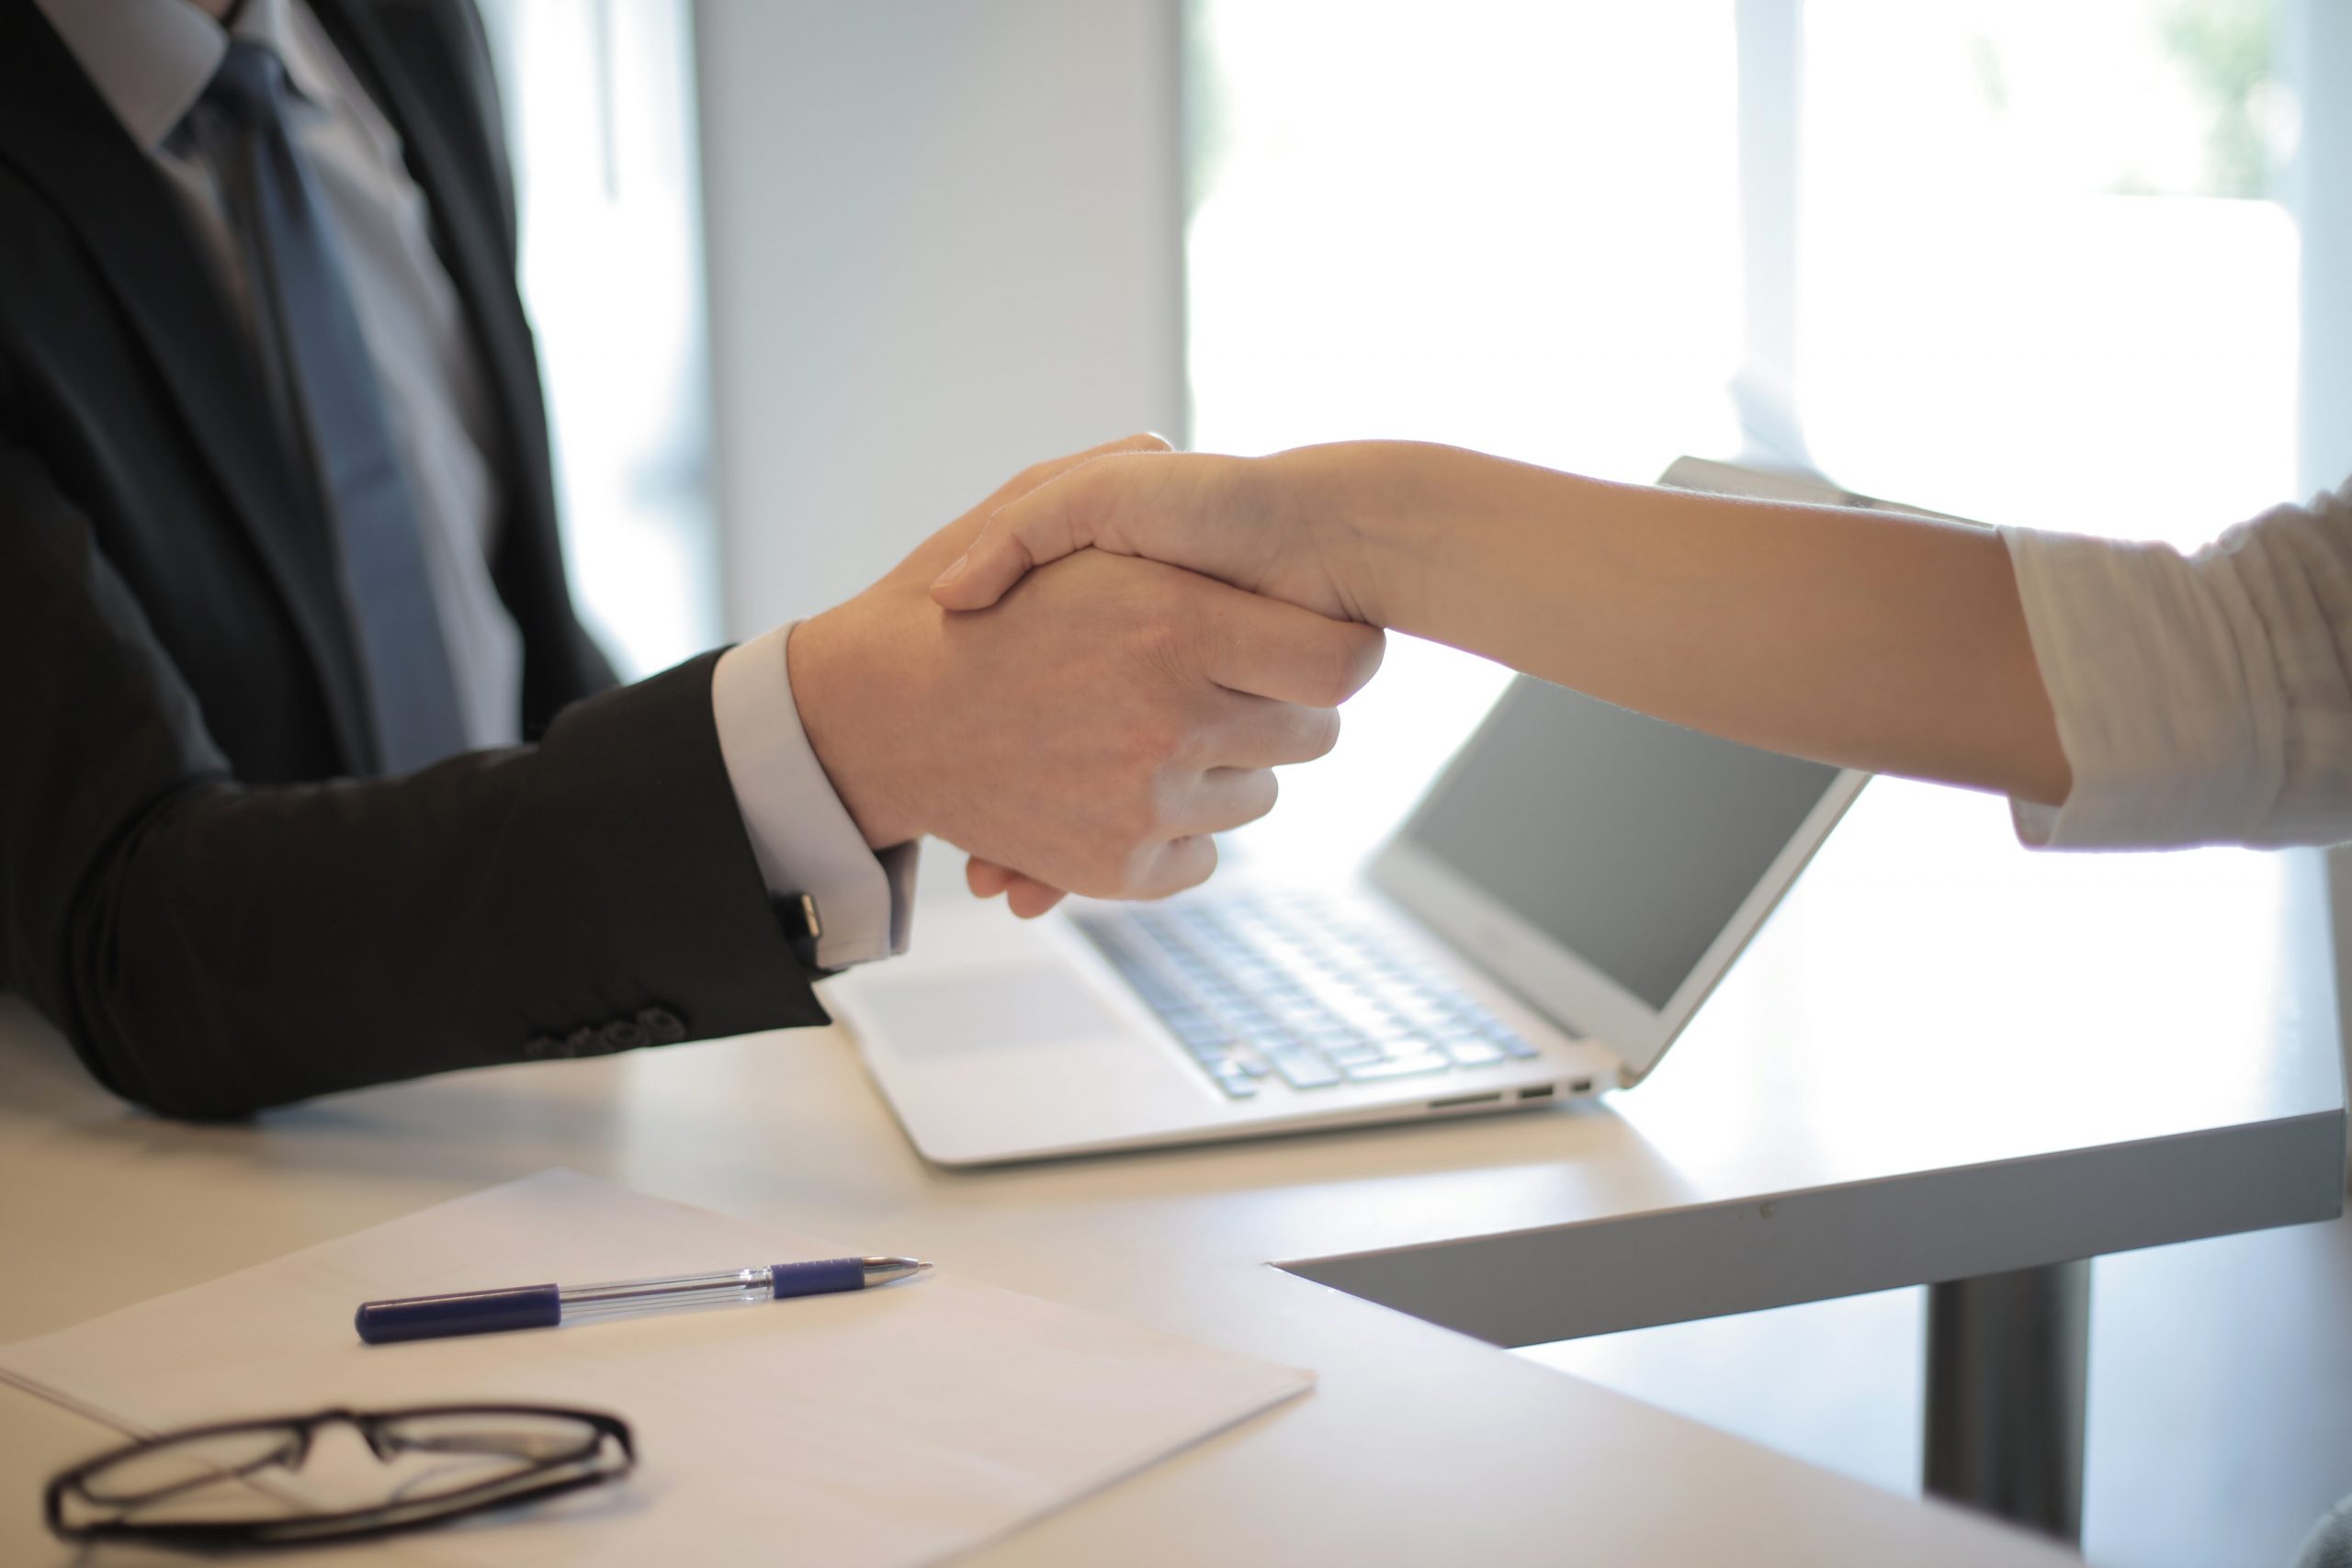 two people shaking hands over business deal